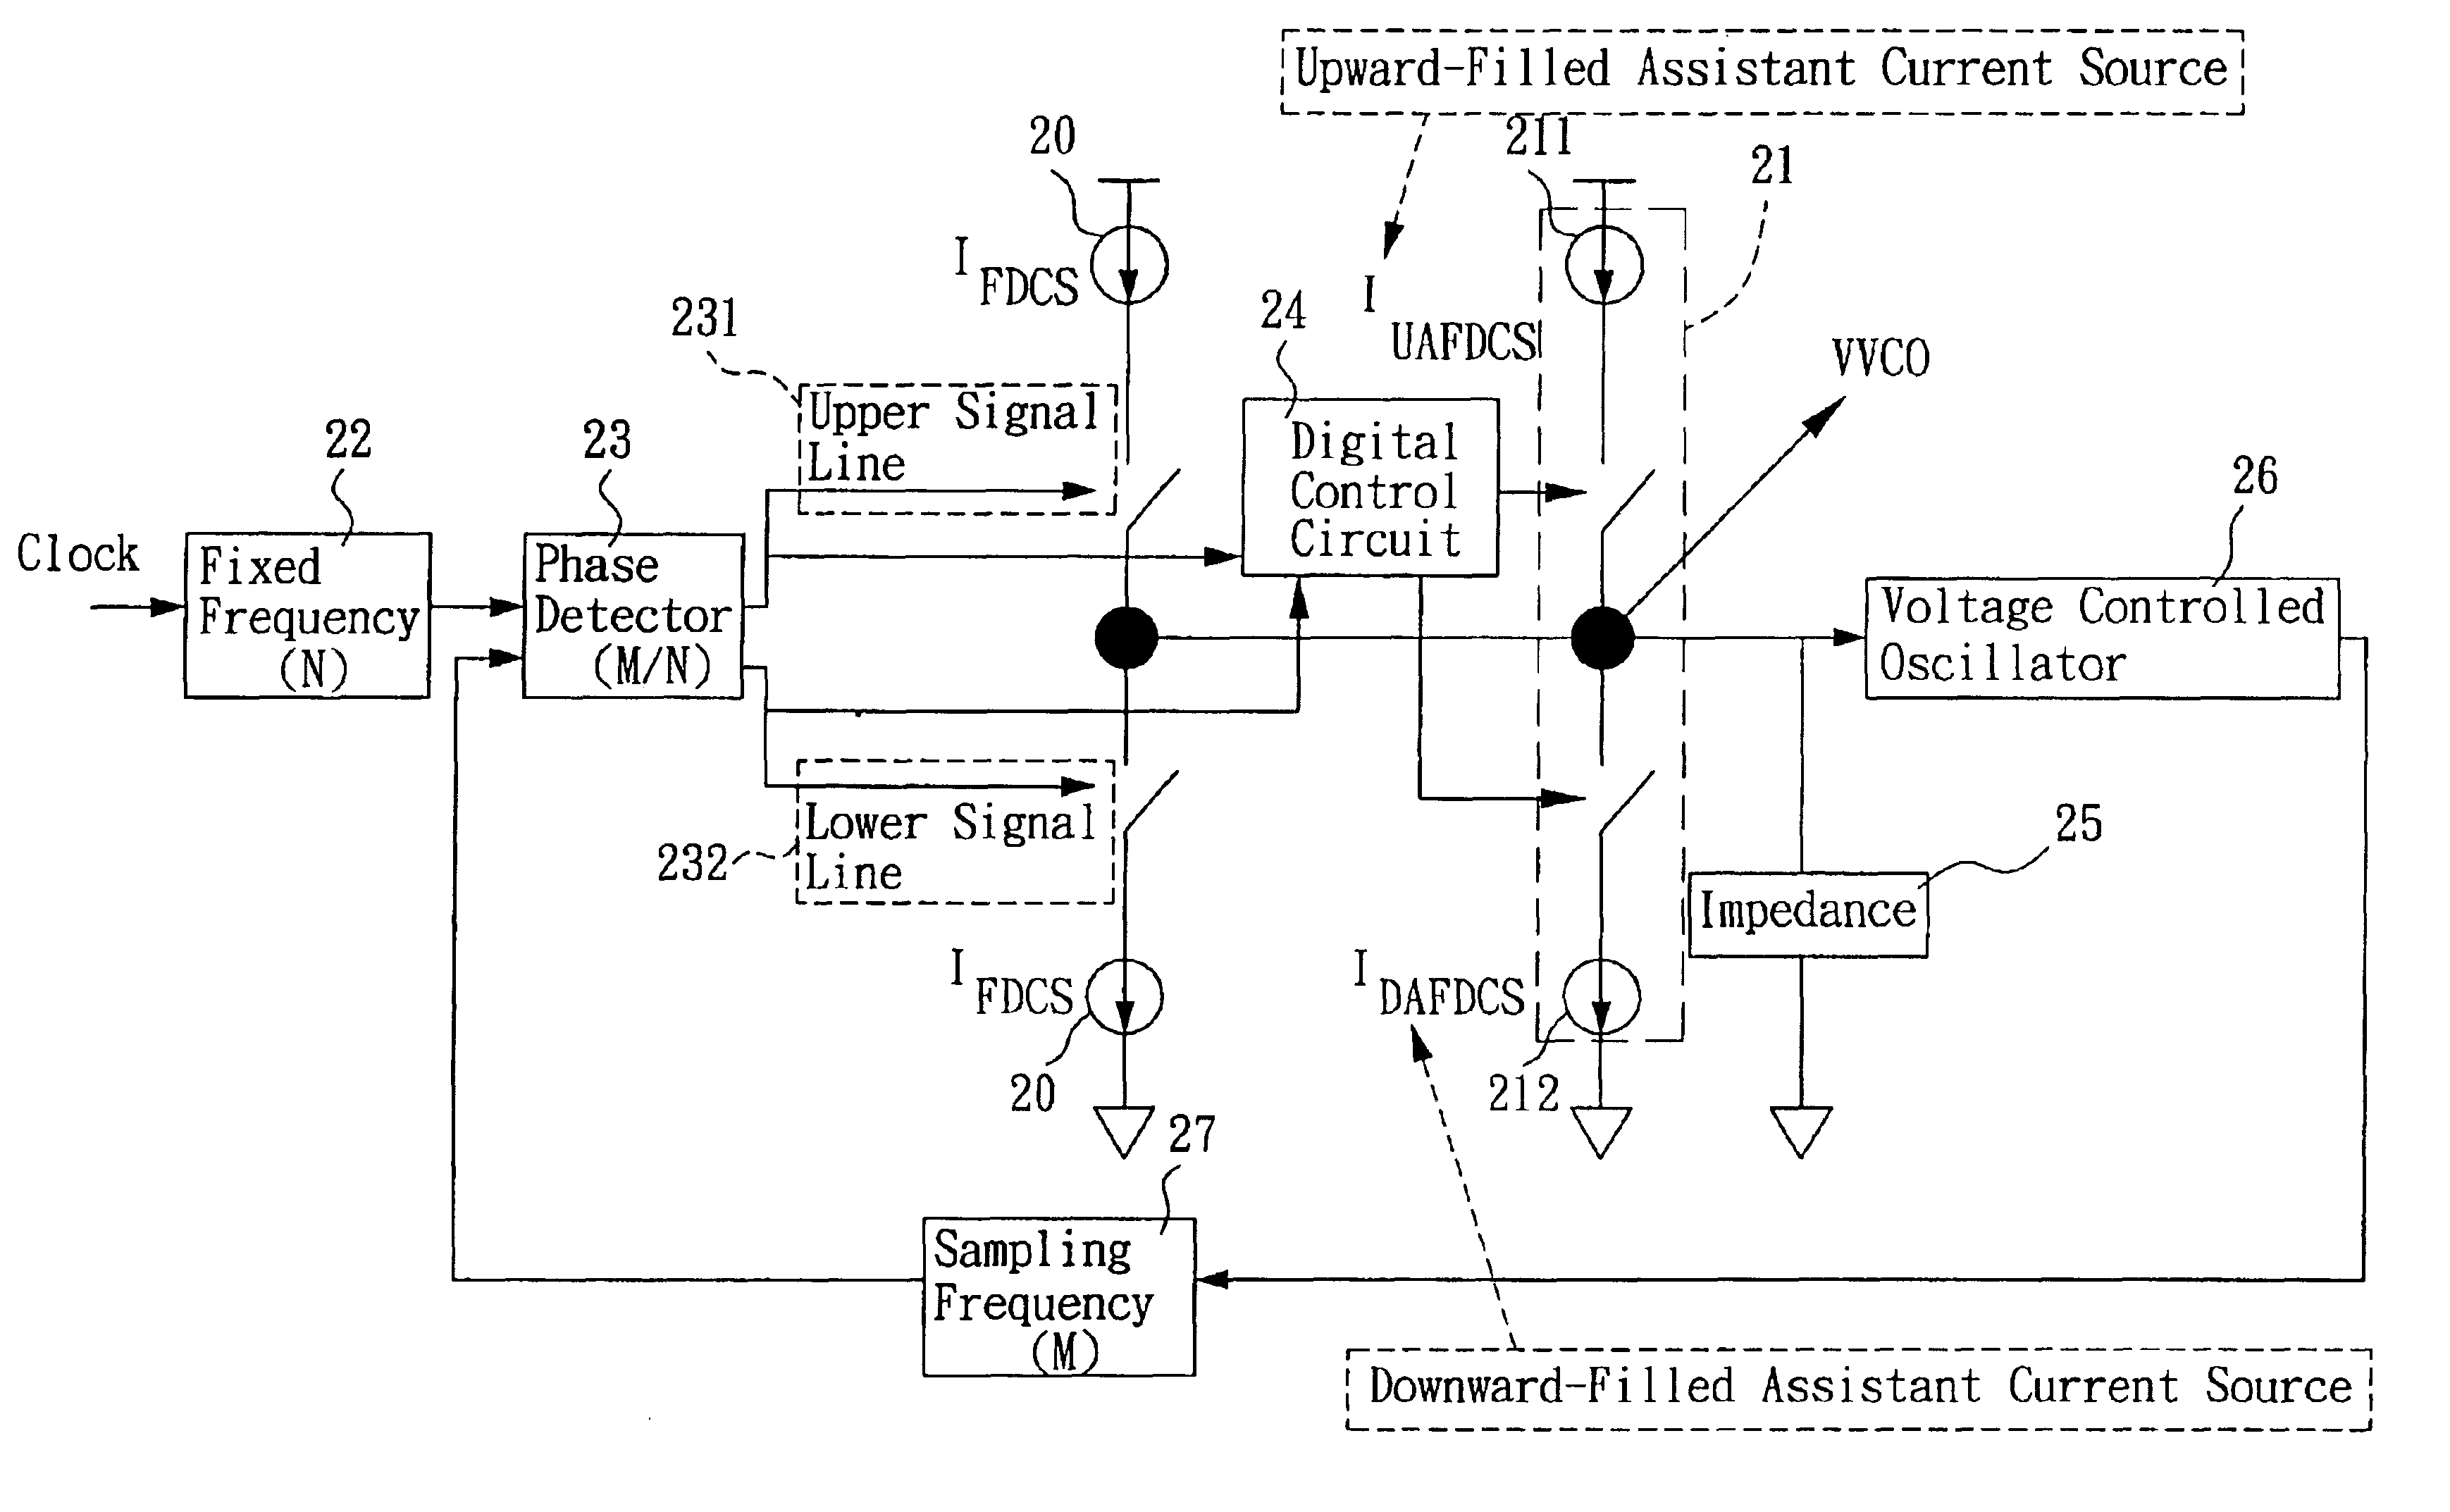 Fast frequency locking method and architecture realized by employing adaptive asymmetric charge-pump current mechanism